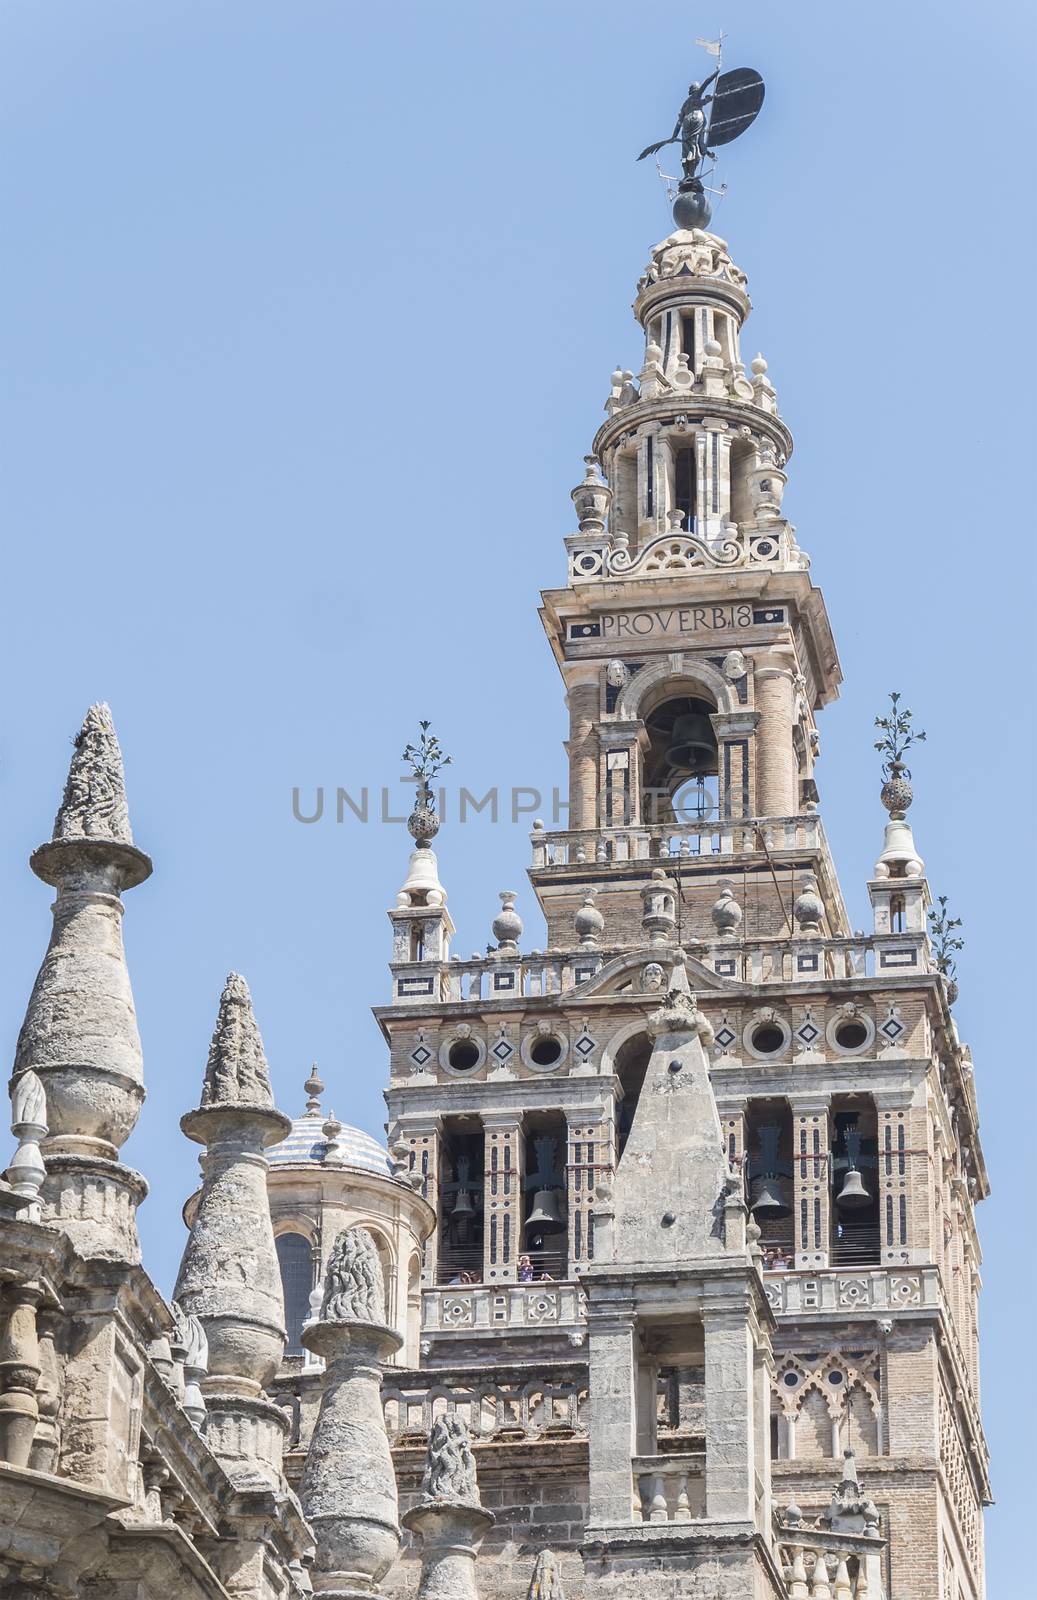 The Cathedral of Saint Mary of the See (Seville Cathedral) in Seville, Andalusia, Spain